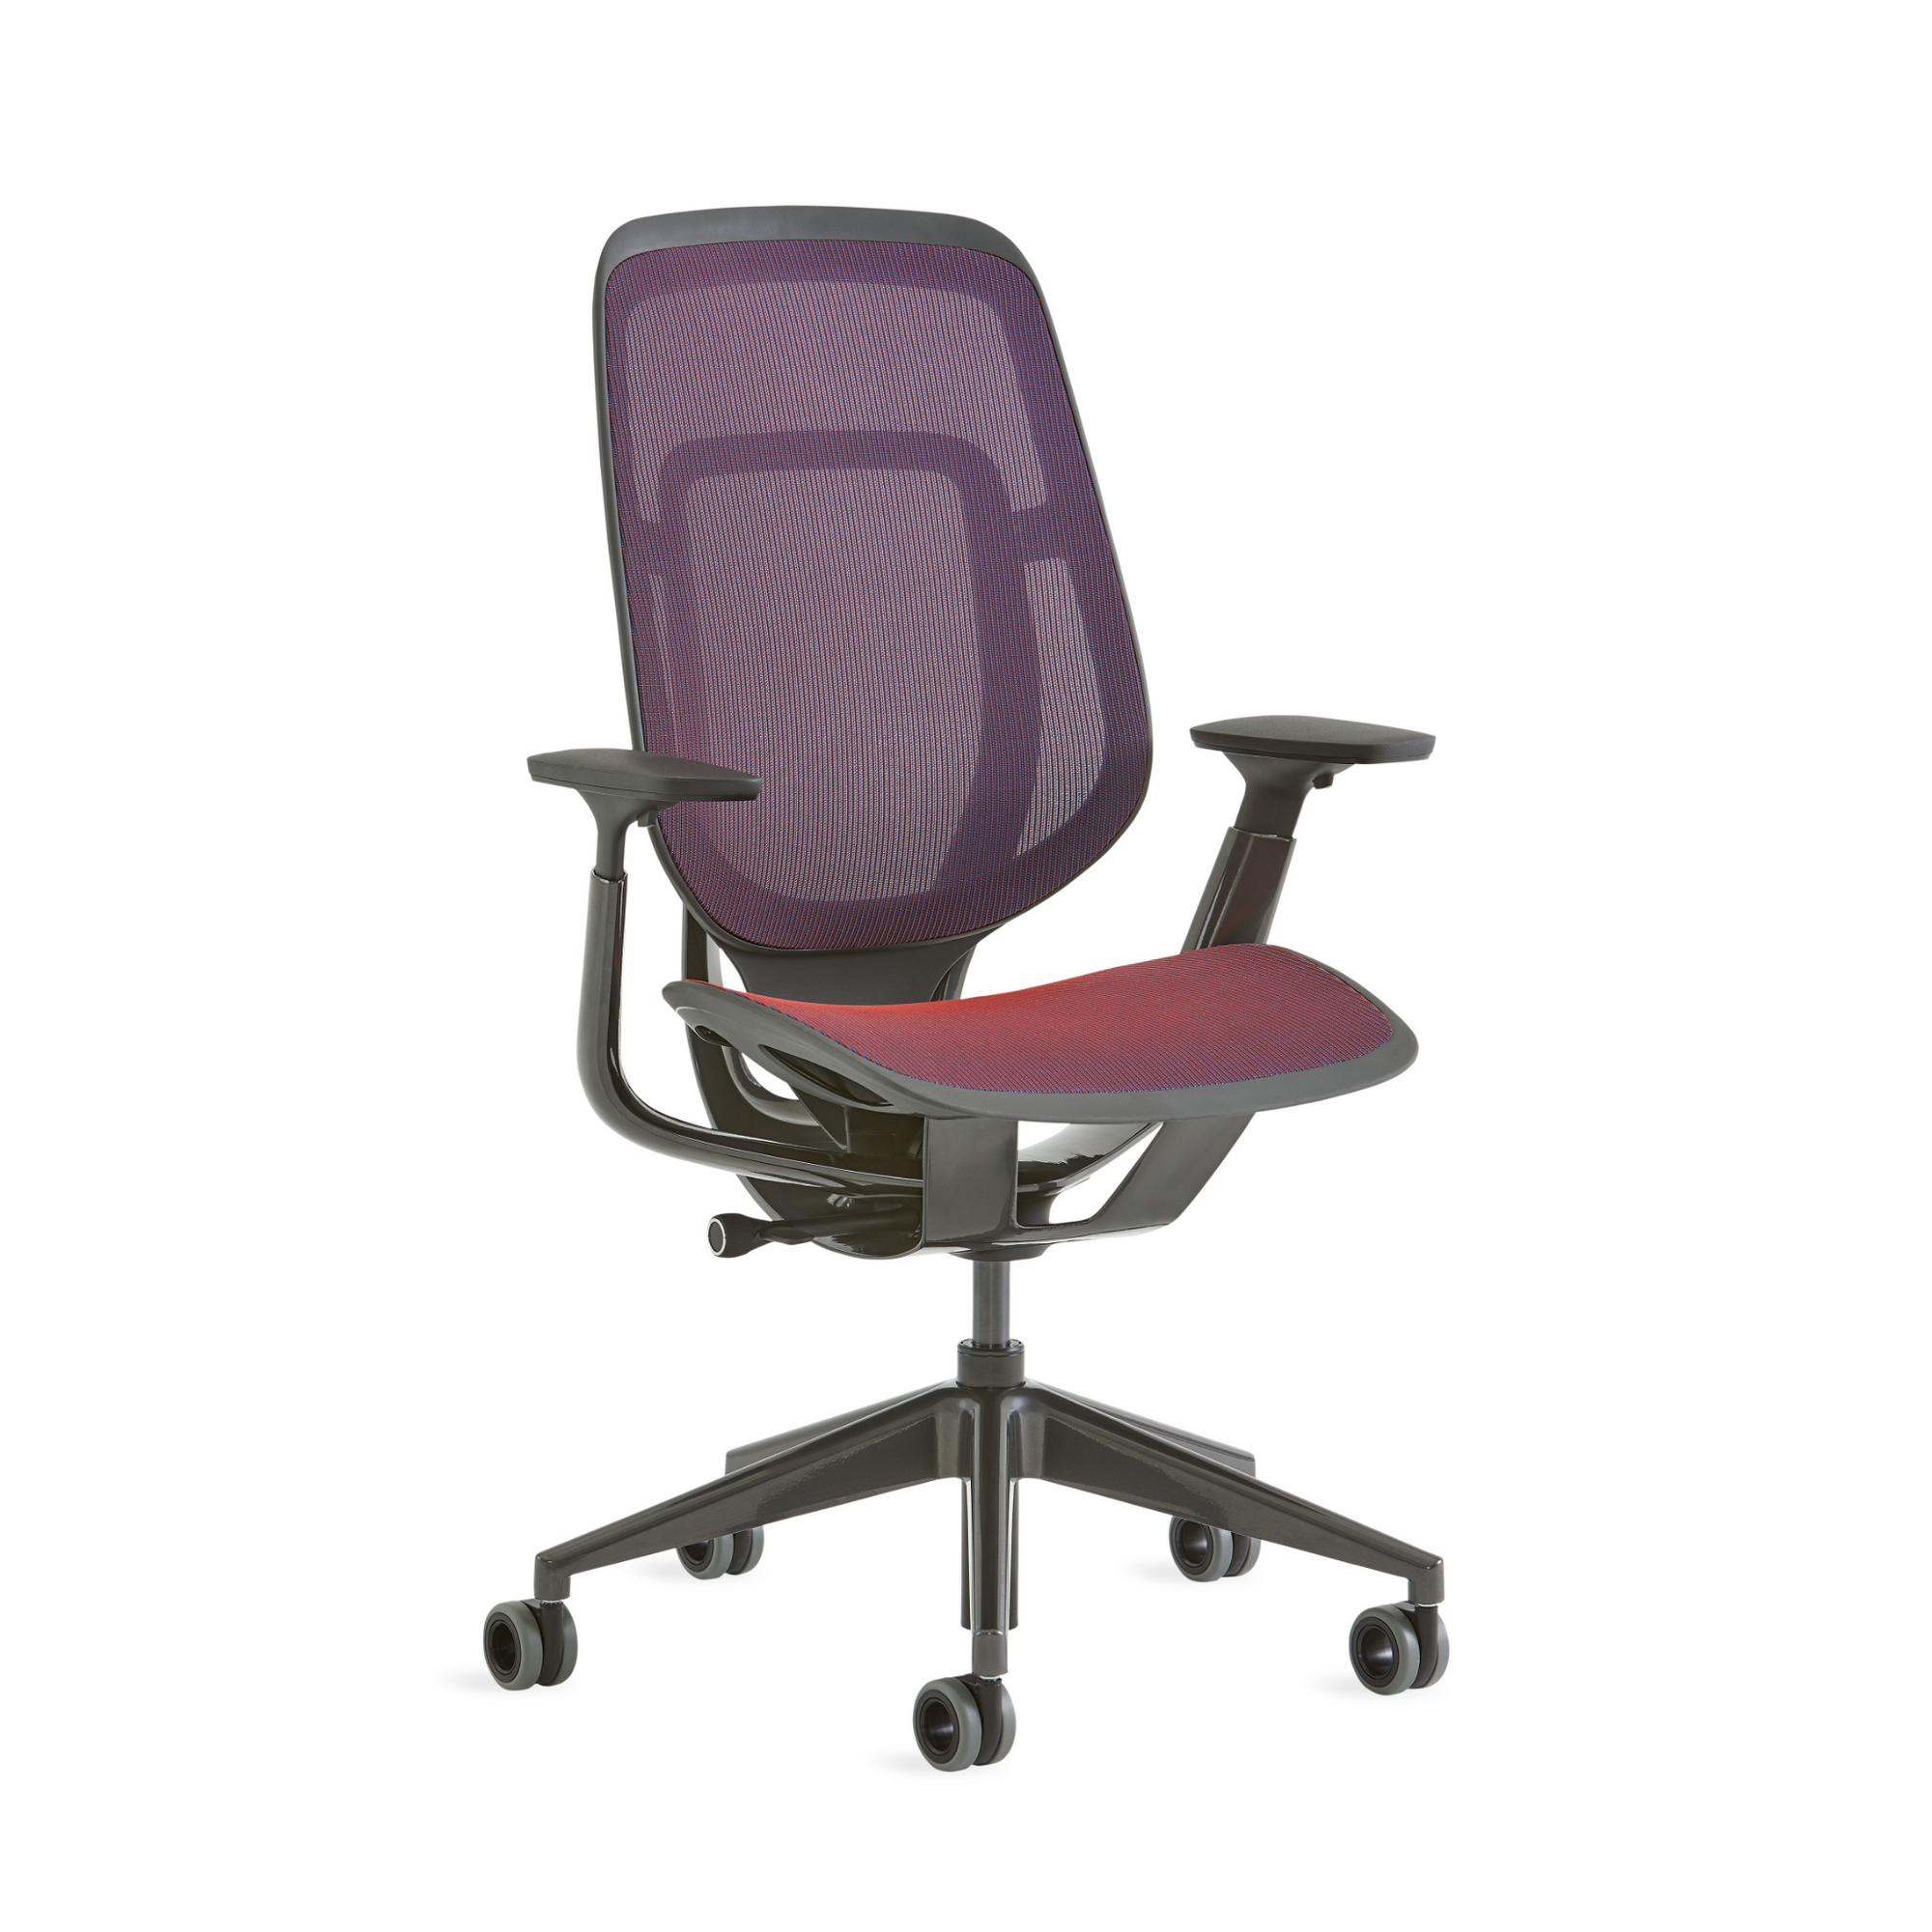 Go Beyond With Steelcase Karman - Interstate Office Products, Inc.